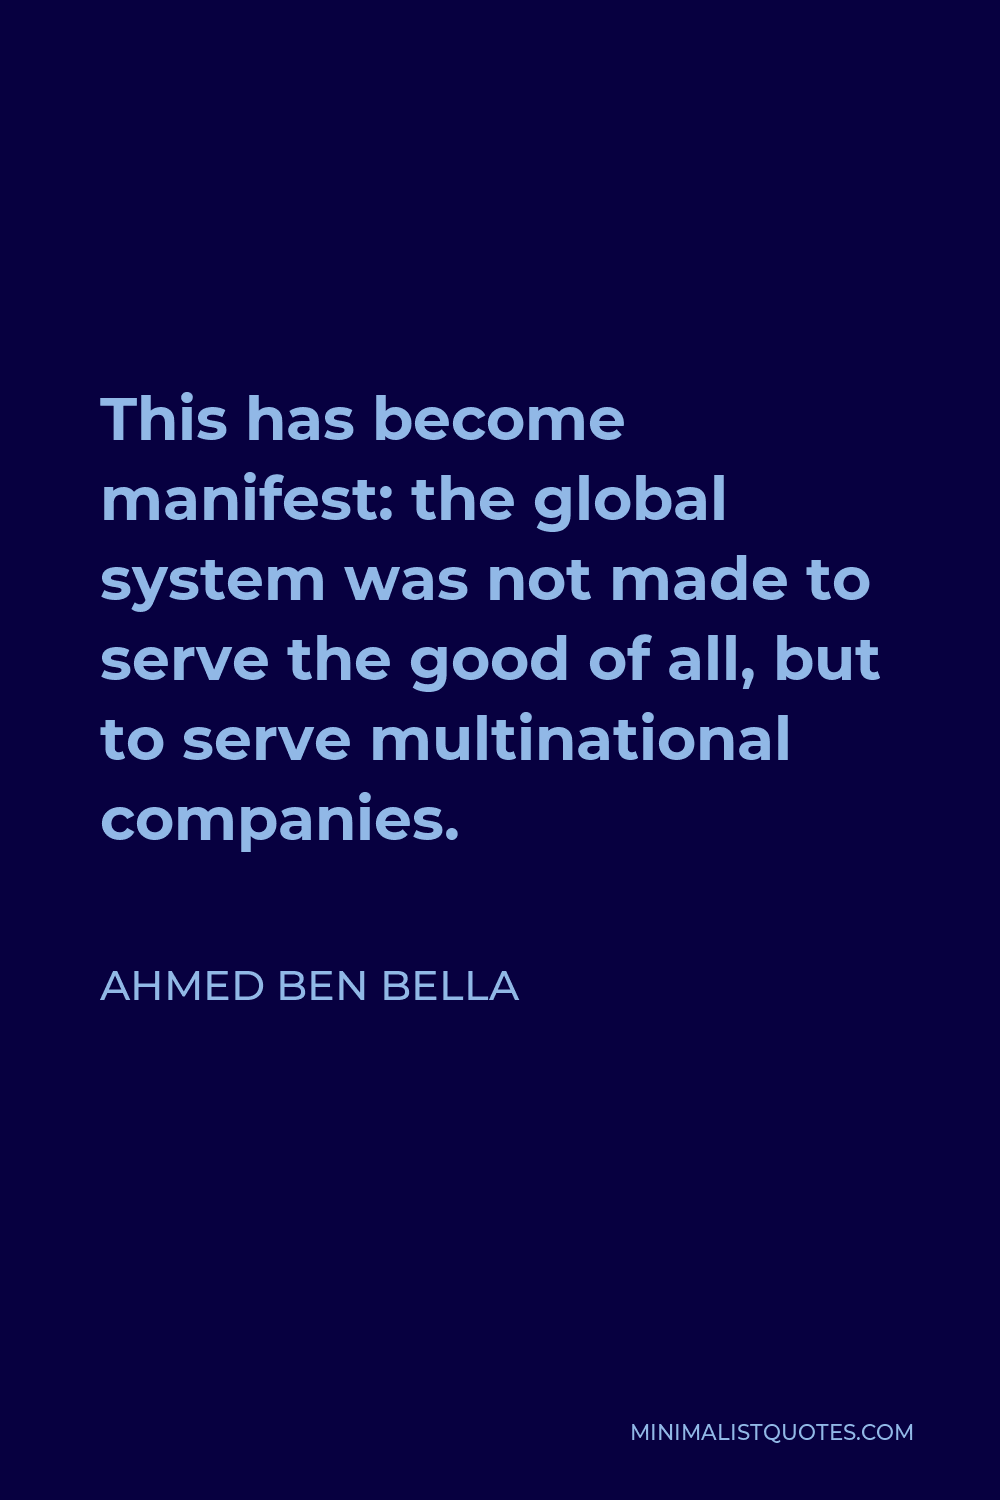 Ahmed Ben Bella Quote - This has become manifest: the global system was not made to serve the good of all, but to serve multinational companies.